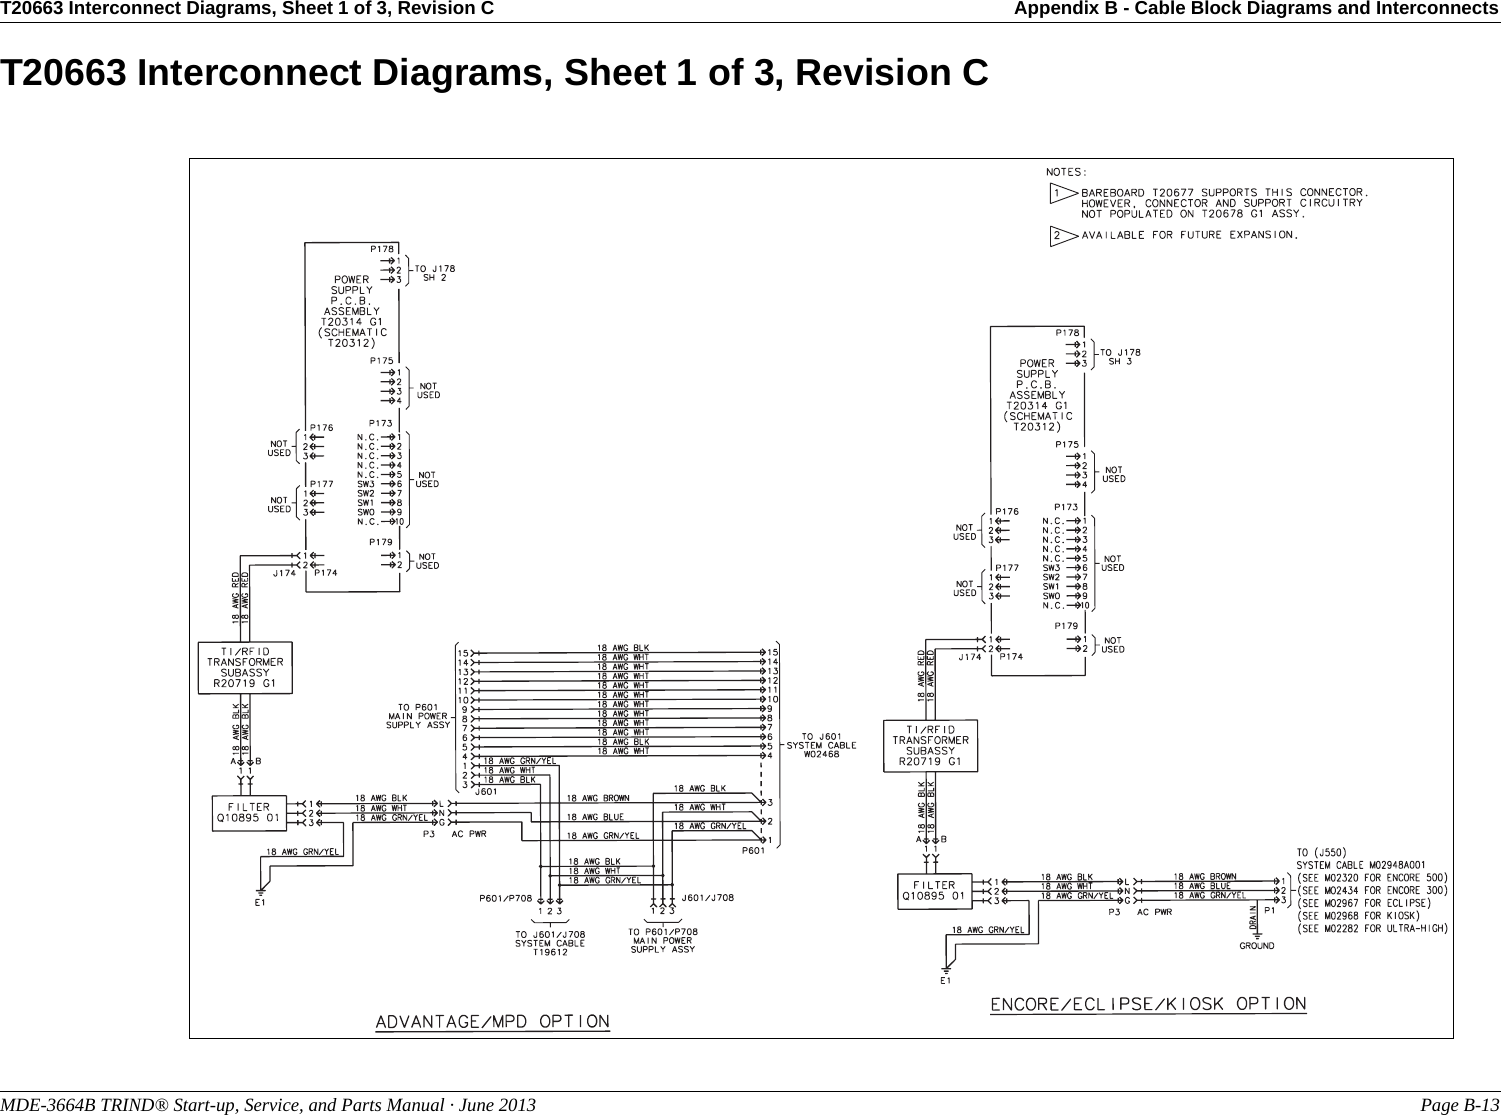 T20663 Interconnect Diagrams, Sheet 1 of 3, Revision C Appendix B - Cable Block Diagrams and InterconnectsMDE-3664B TRIND® Start-up, Service, and Parts Manual · June 2013 Page B-13T20663 Interconnect Diagrams, Sheet 1 of 3, Revision C